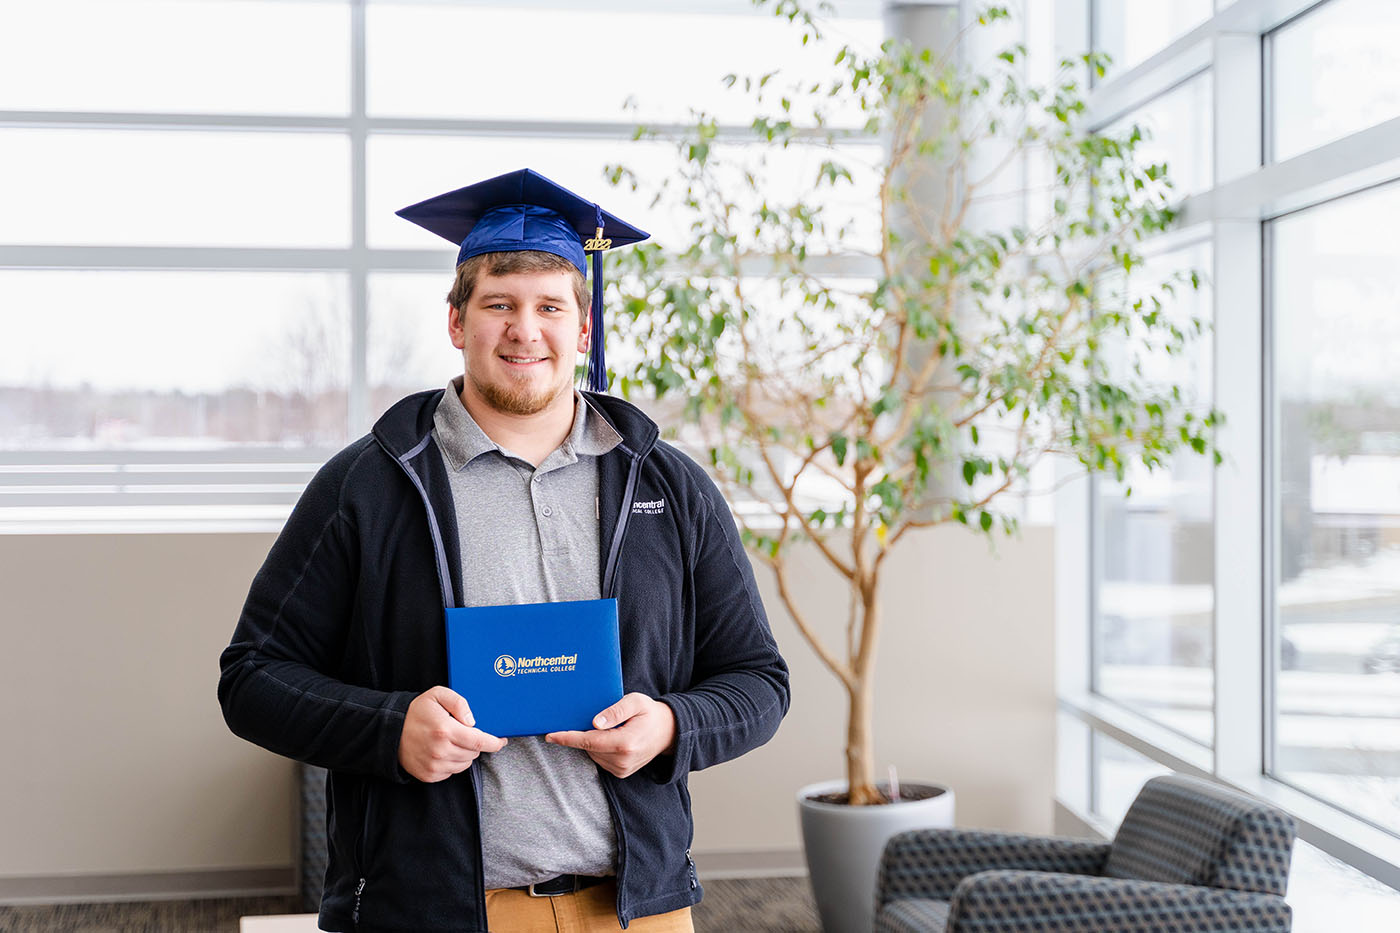 Jamieson posing while wearing an NTC graduation cap and holding his diploma.